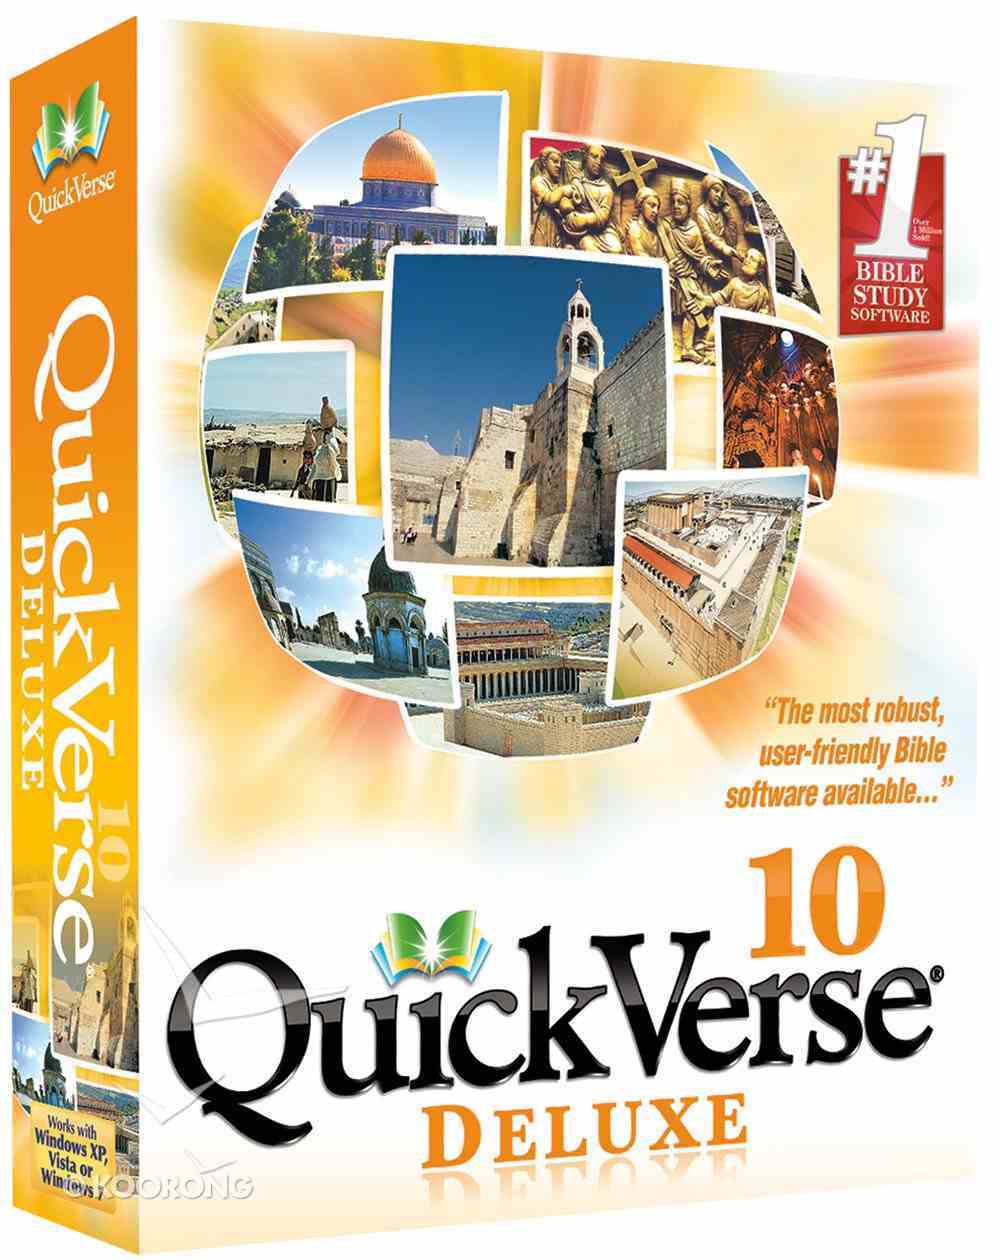 quickverse bible software review